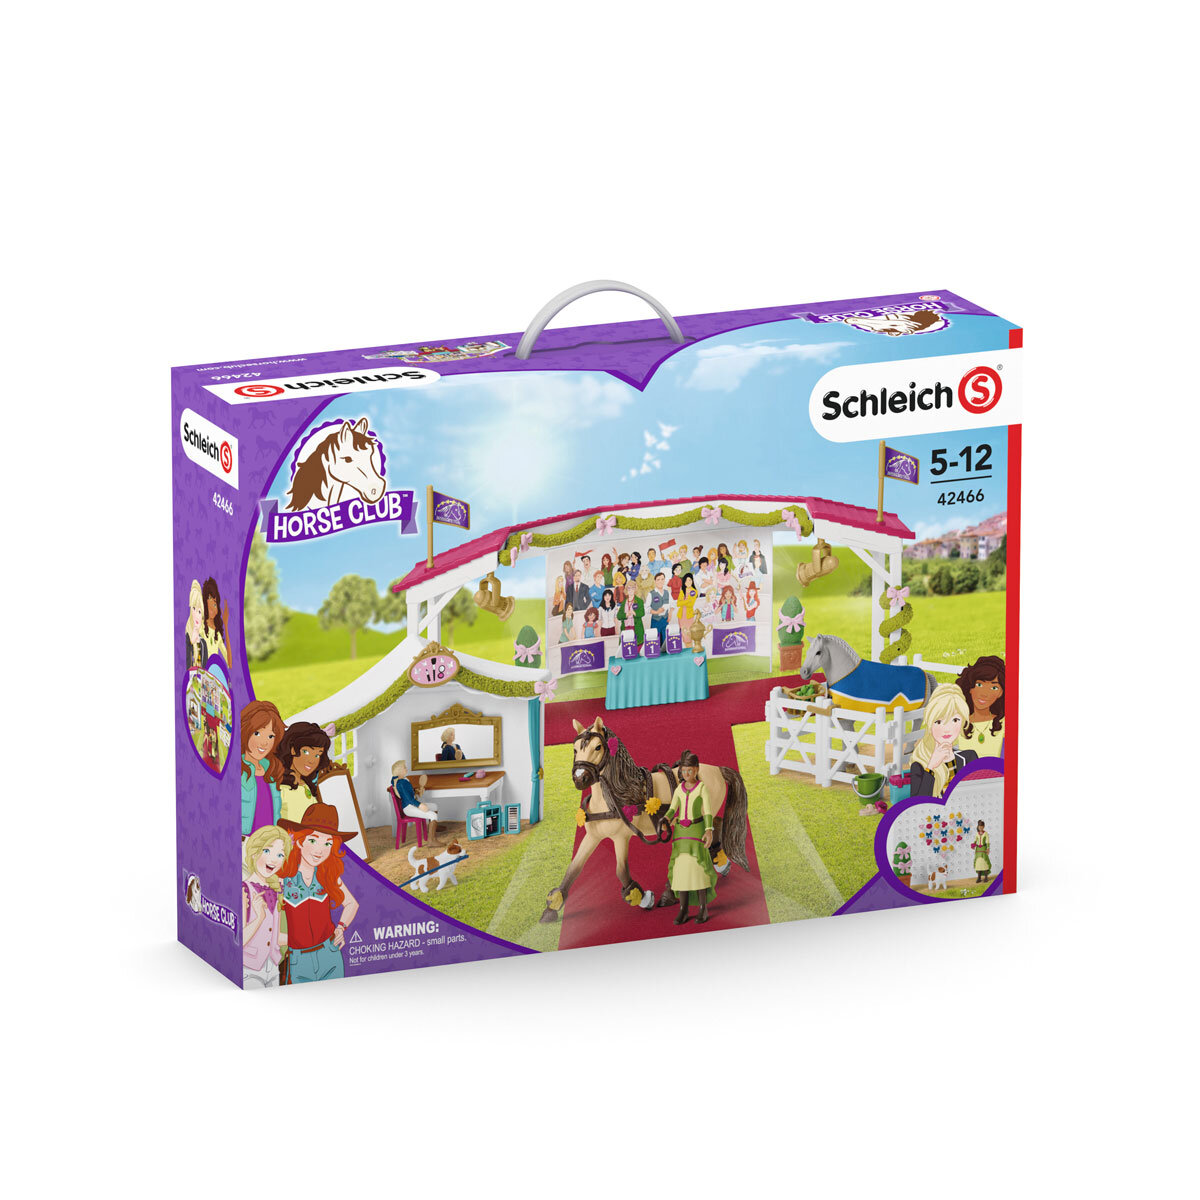 Buy Schleich Big Horse Show Set Box Image at Costco.co.uk